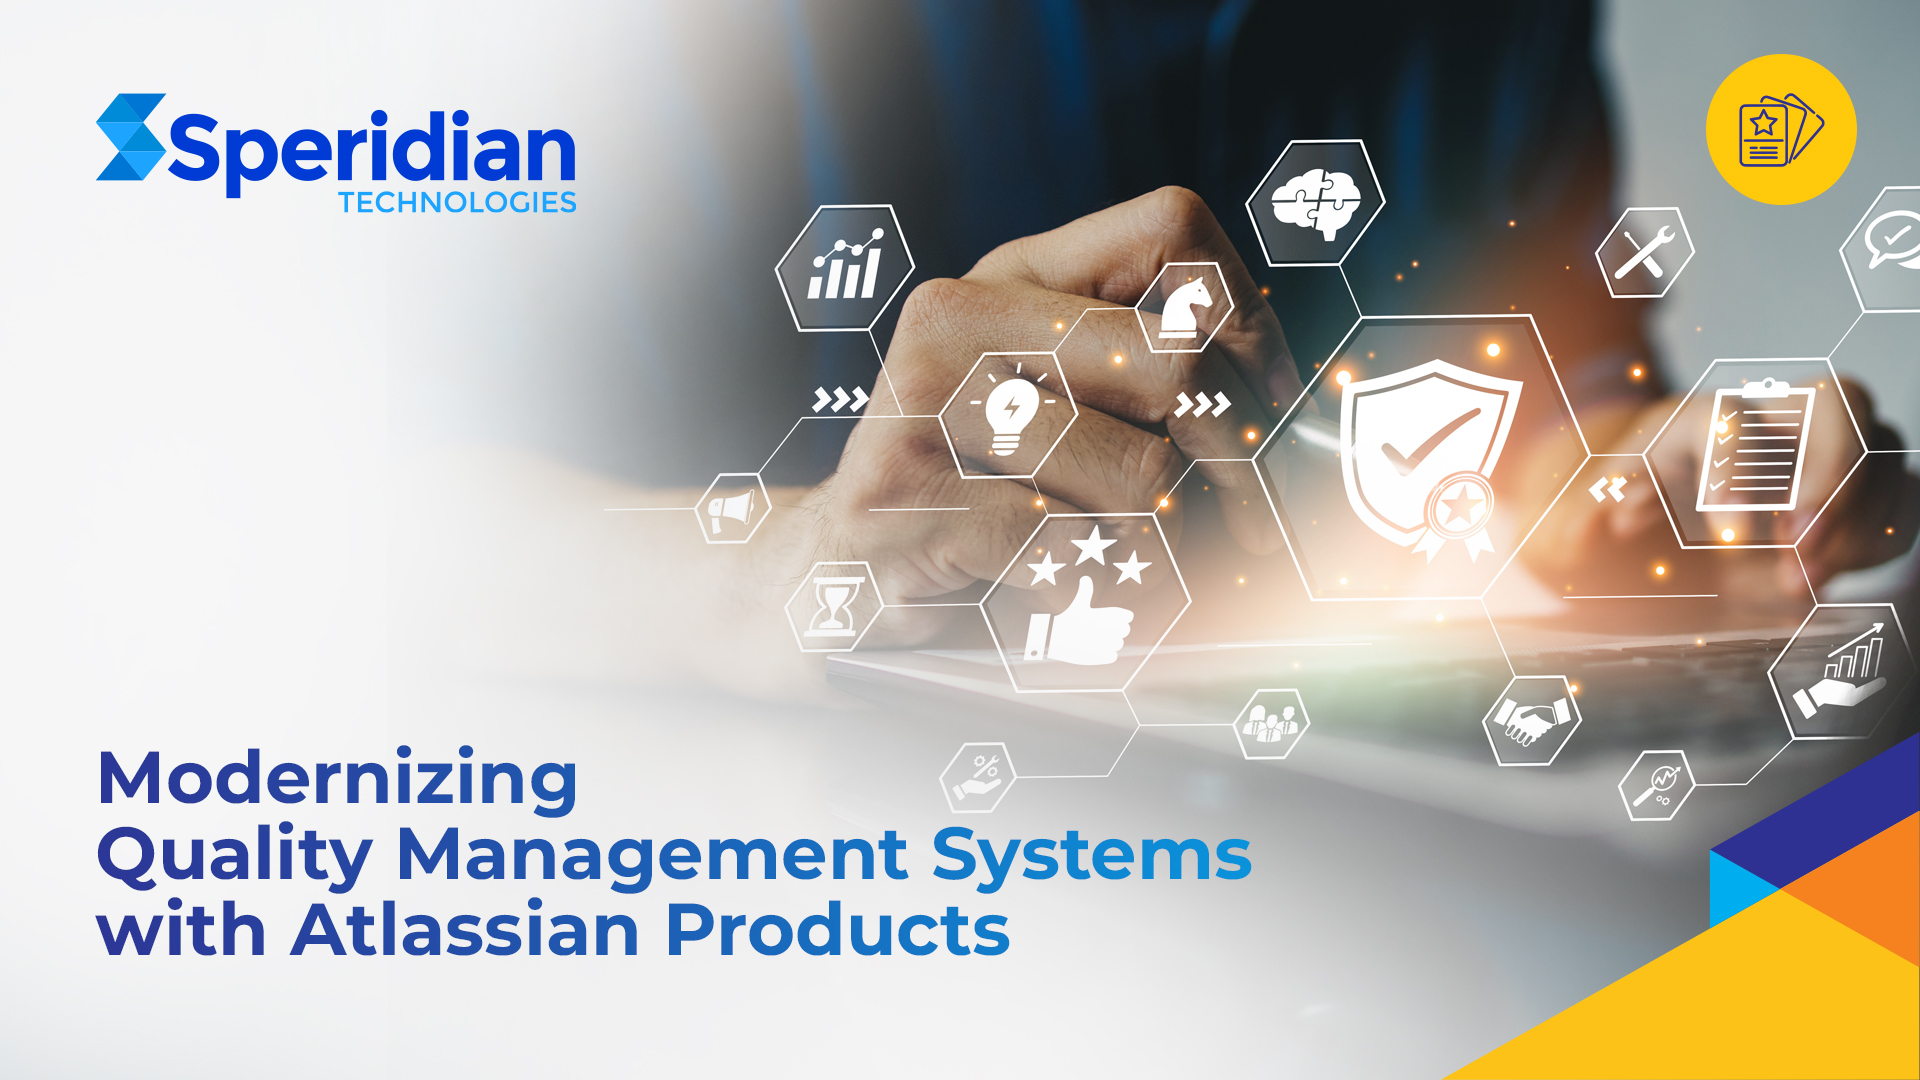 Modernizing Quality Management Systems with Atlassian Products